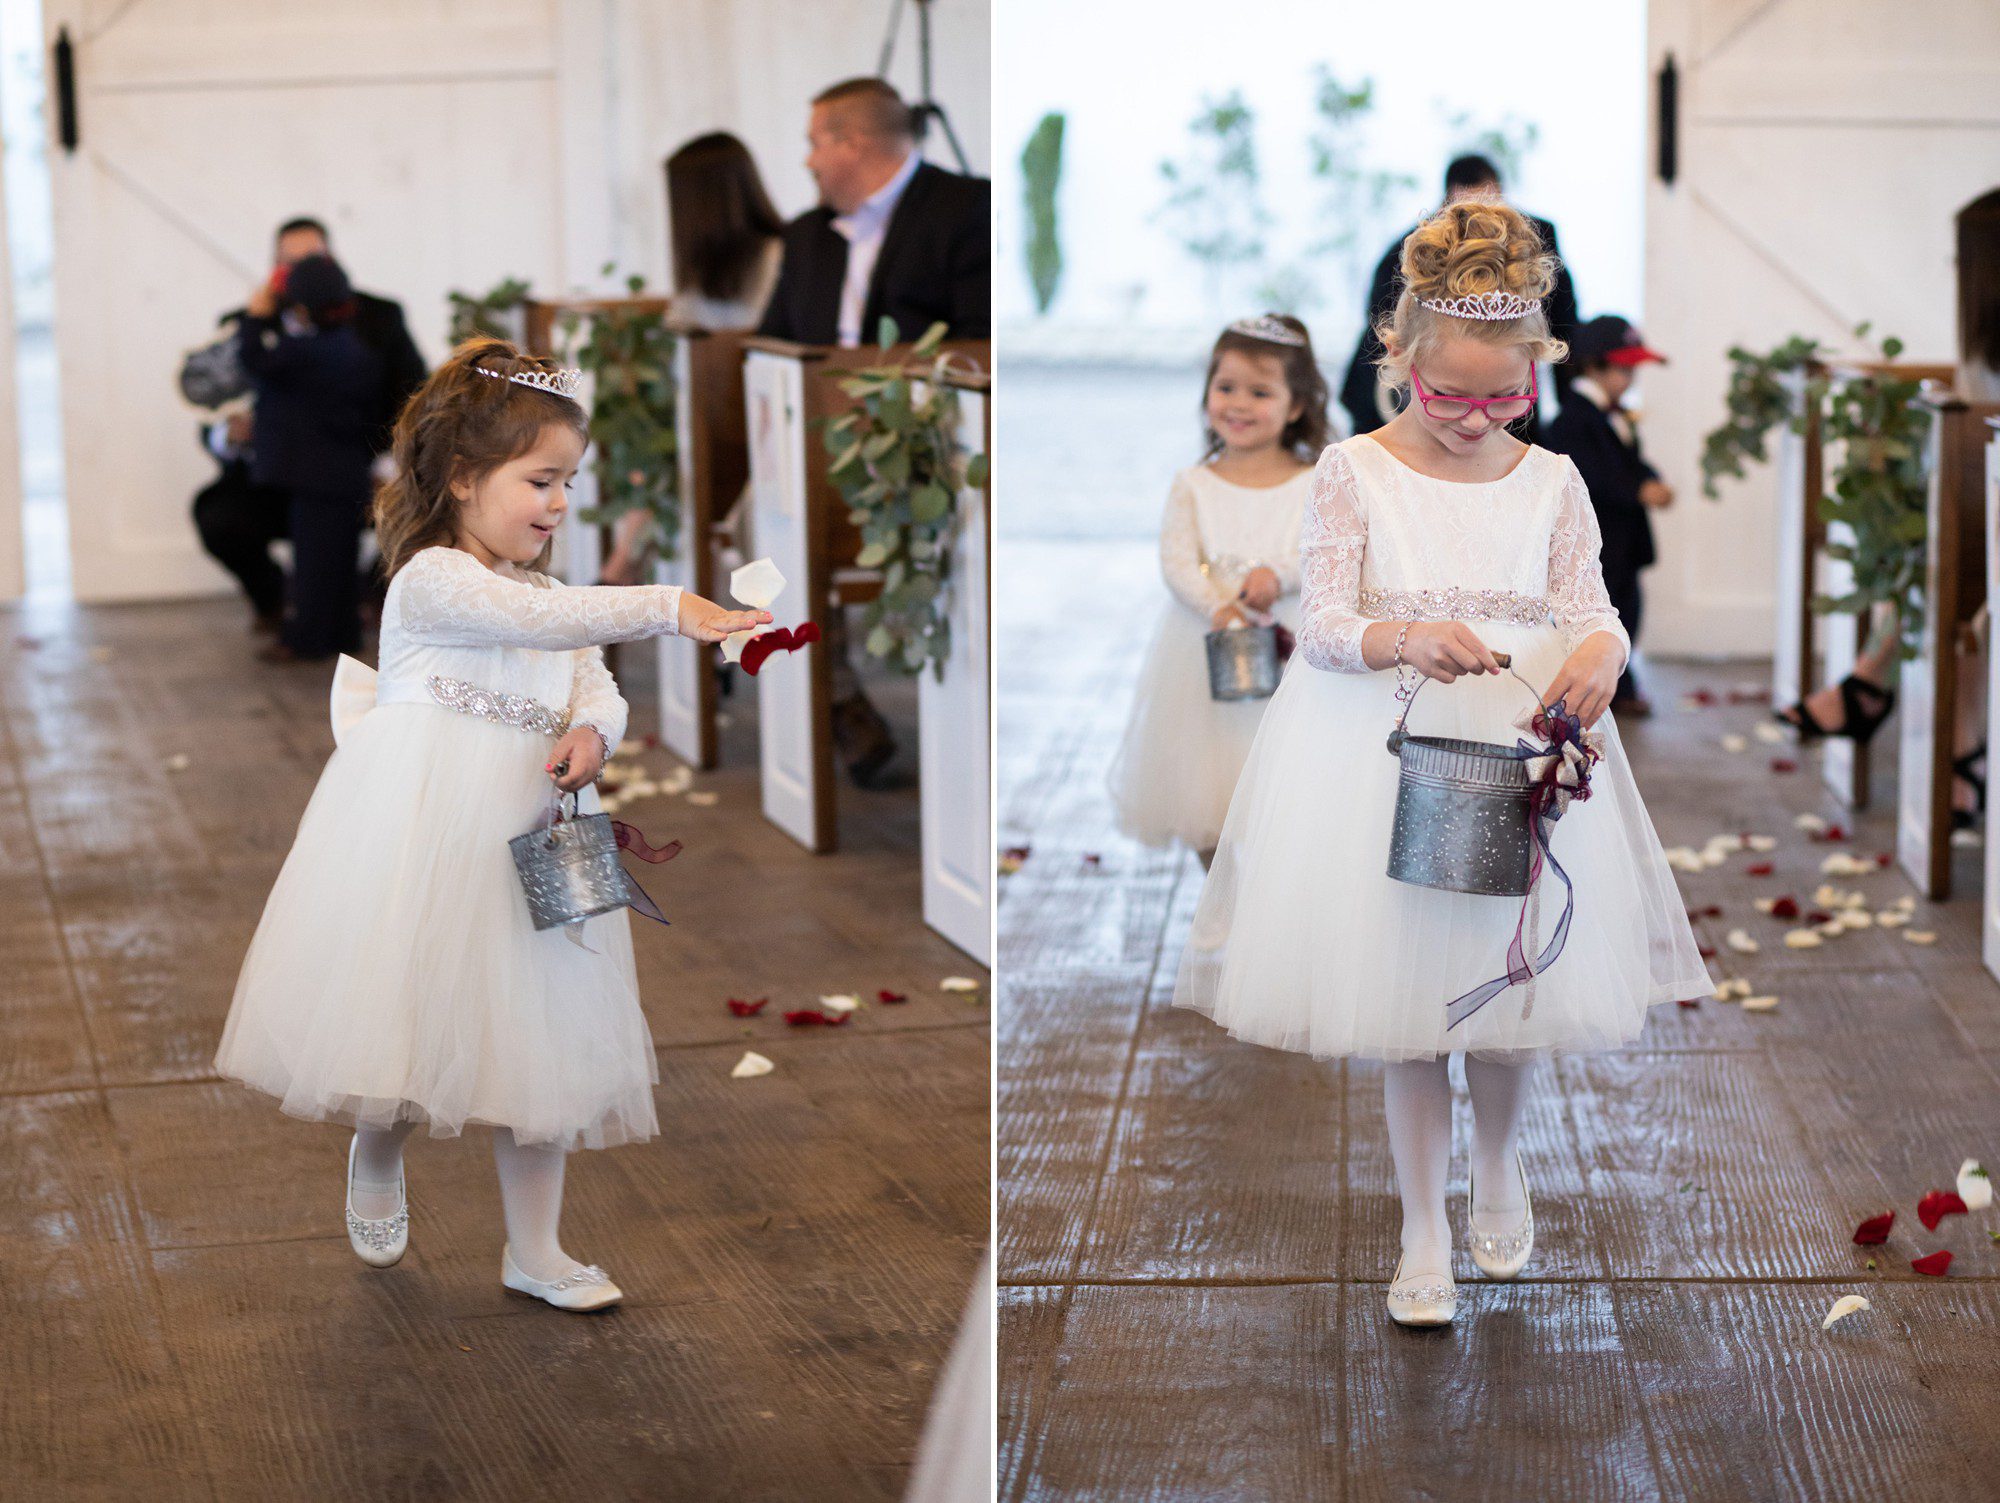 Flower girls during processional at White Dove Barn